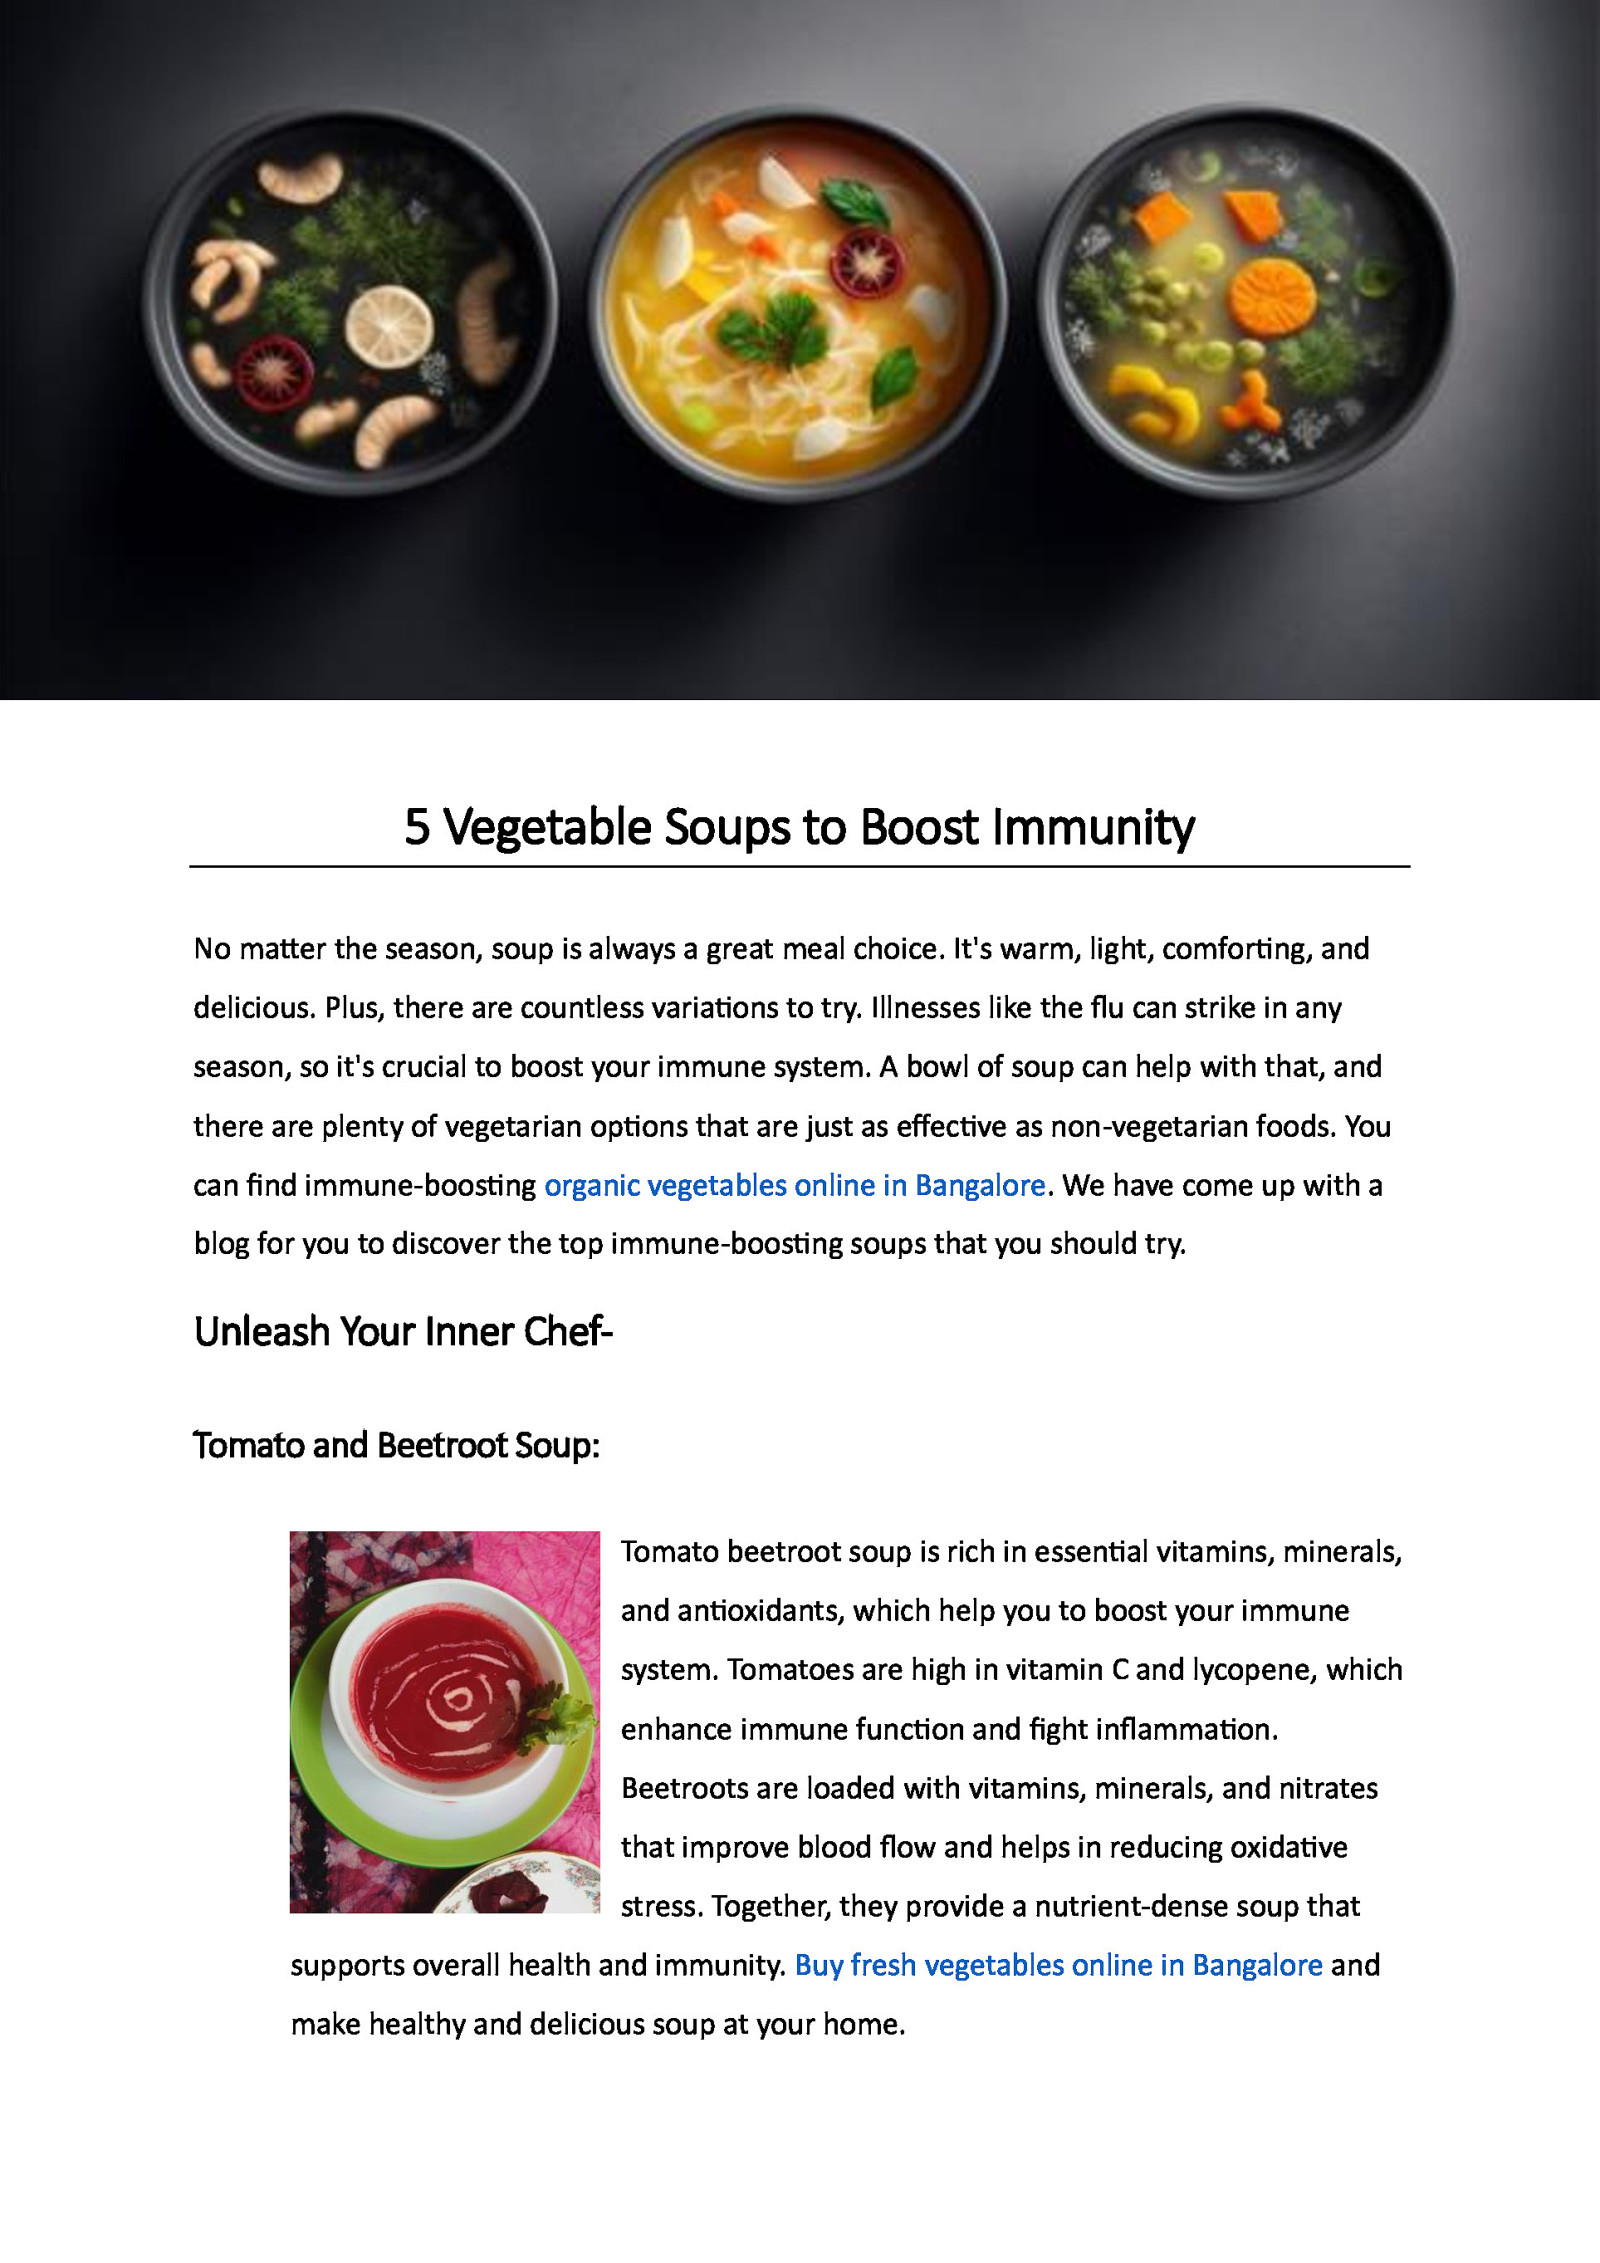 5 Vegetable Soups to Boost Immunity